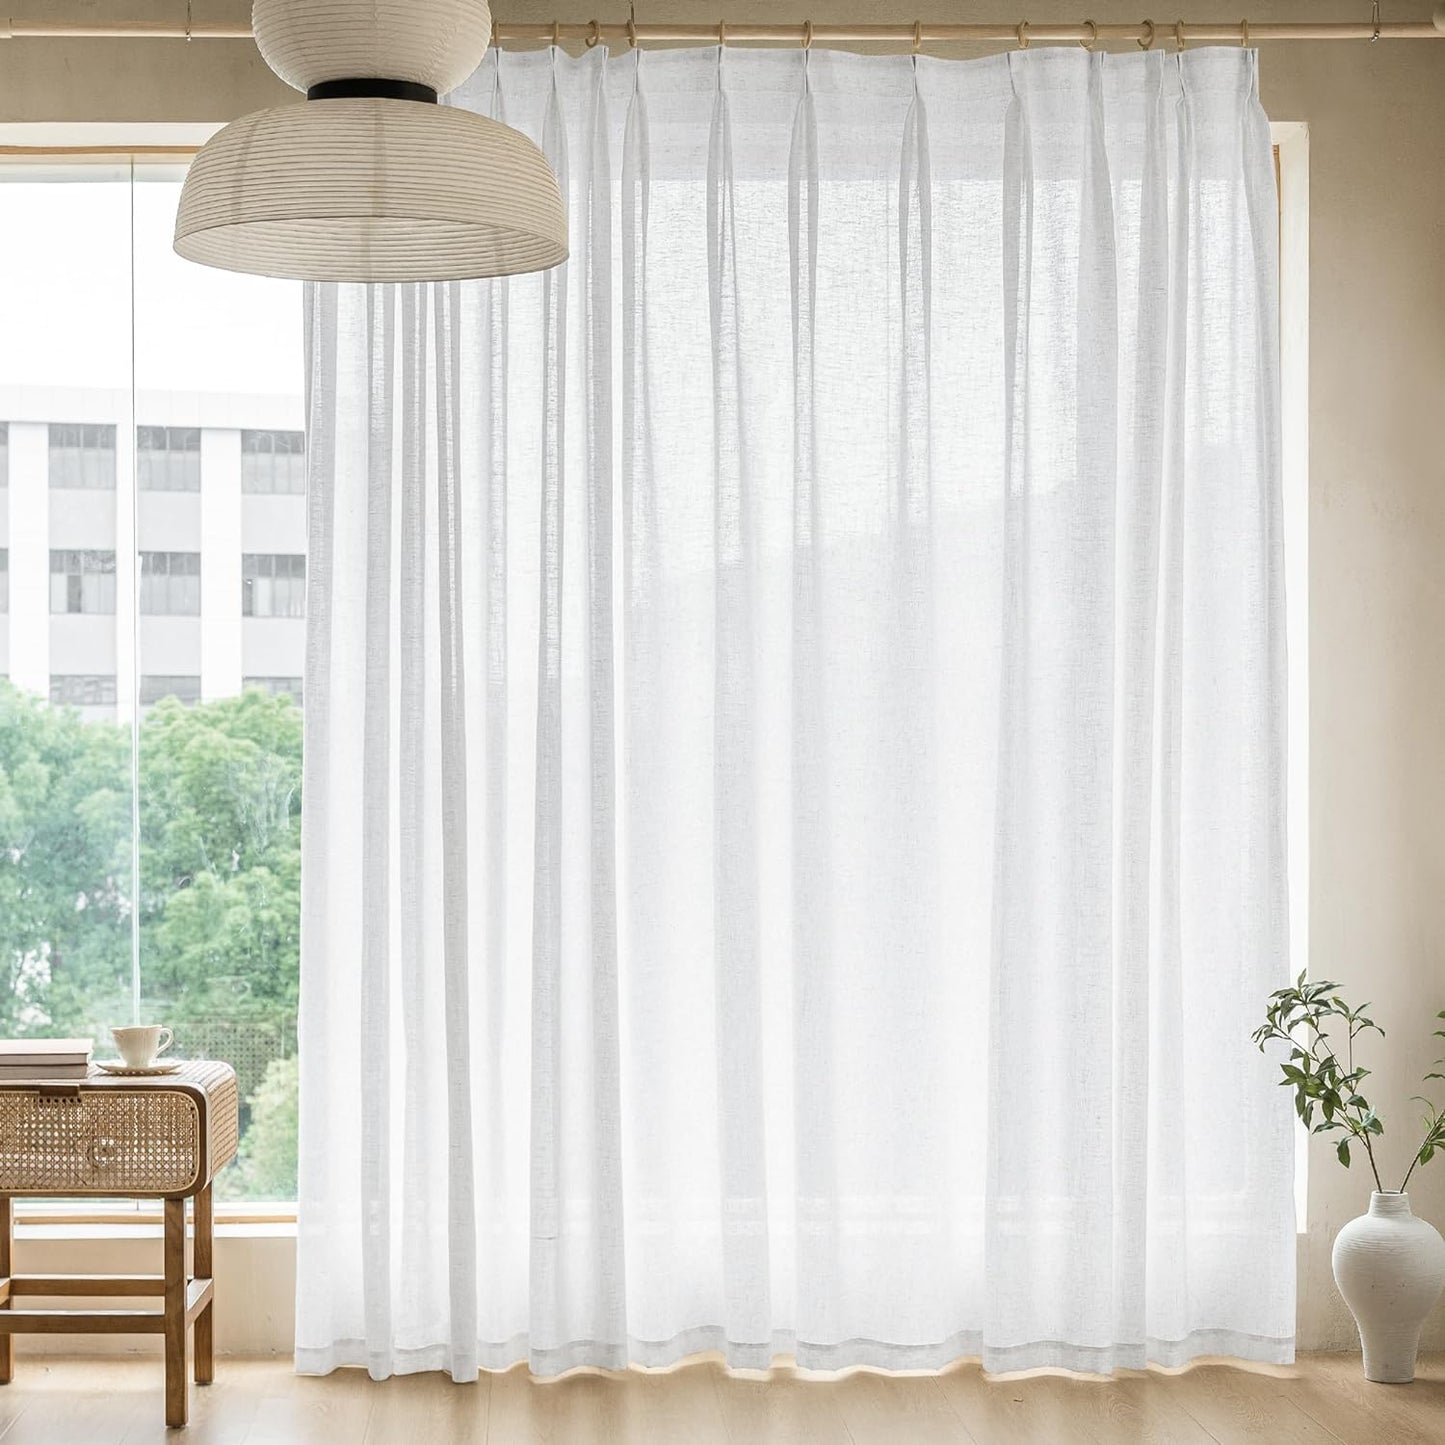 MAIHER Extra Wide Pinch Pleated Drapes 108 Inches Long, Faux Linen Light Filtering Semi Sheer Curtains with Hooks for Living Room Bedroom, Natural Linen (1 Panel, 100 W X 108 L)  MAIHER Beige White 100X96 